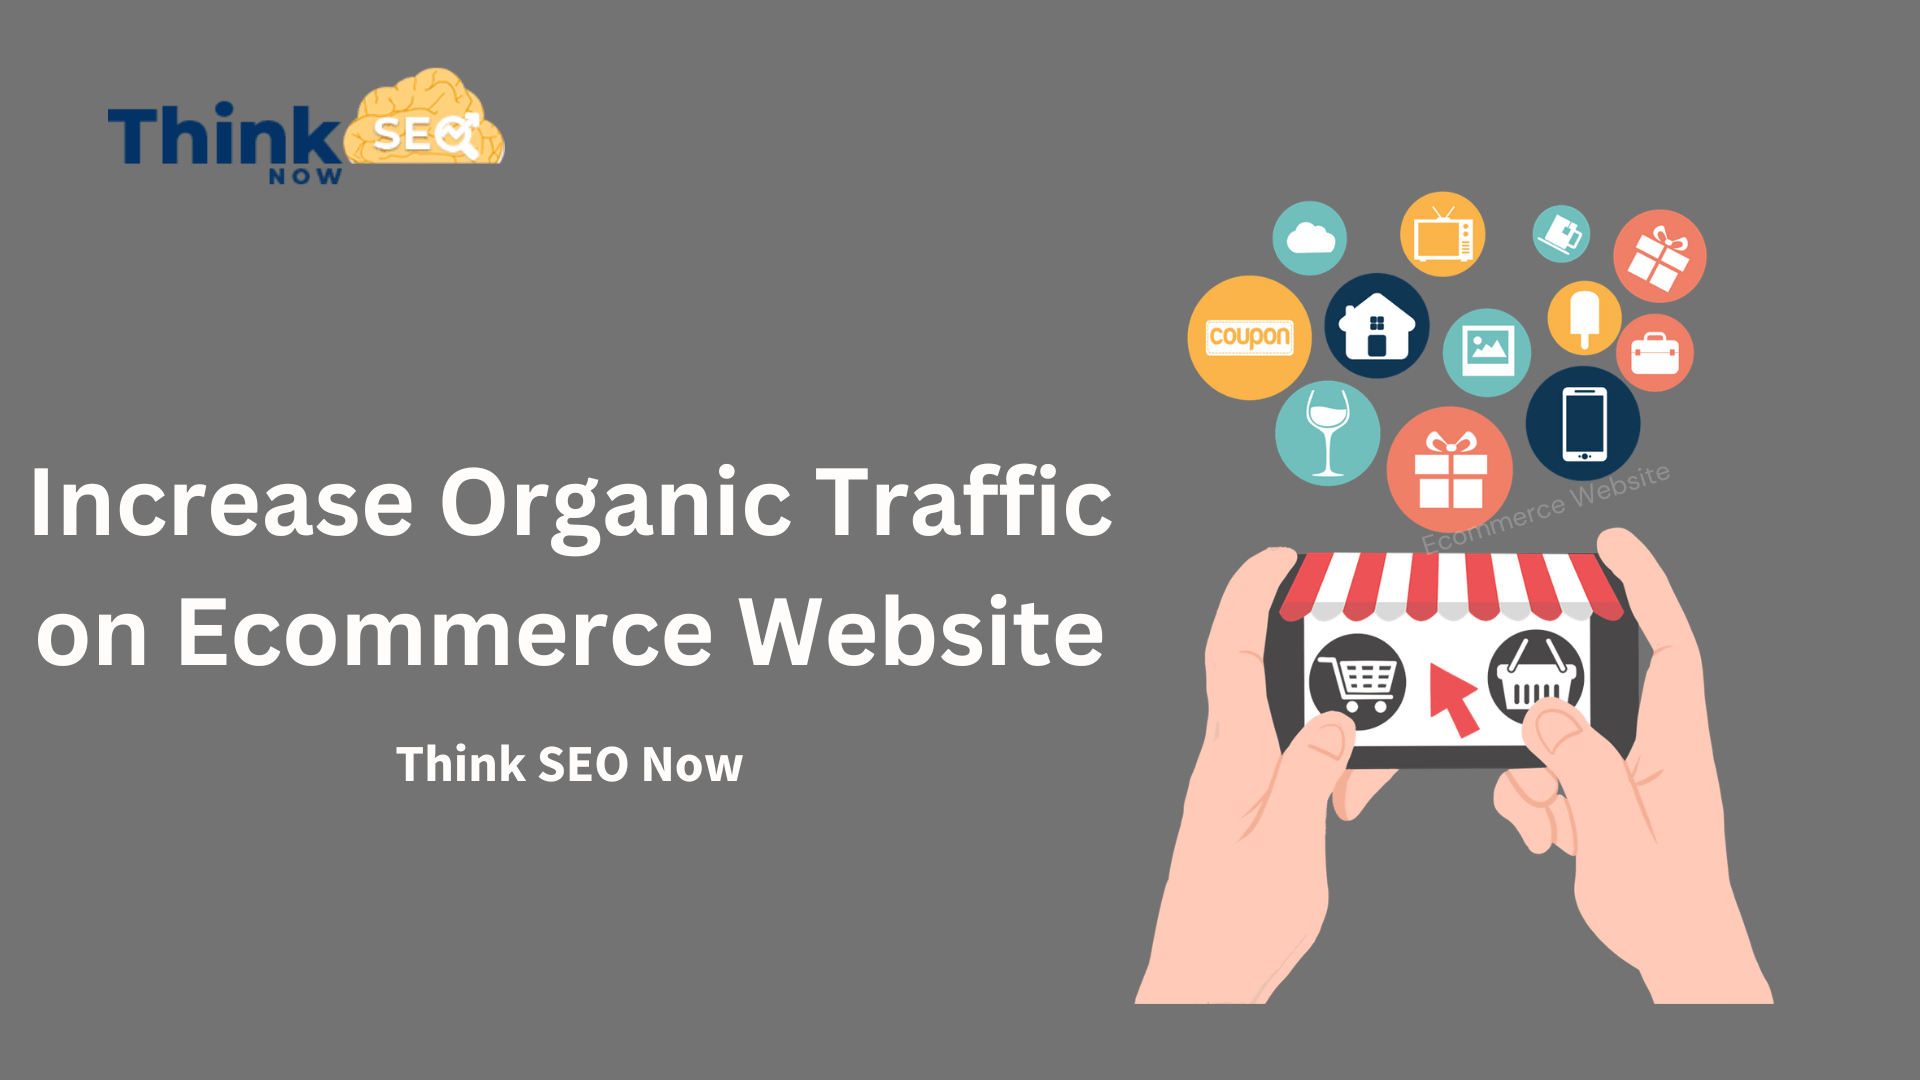 How to Increase Organic Traffic on Ecommerce Website